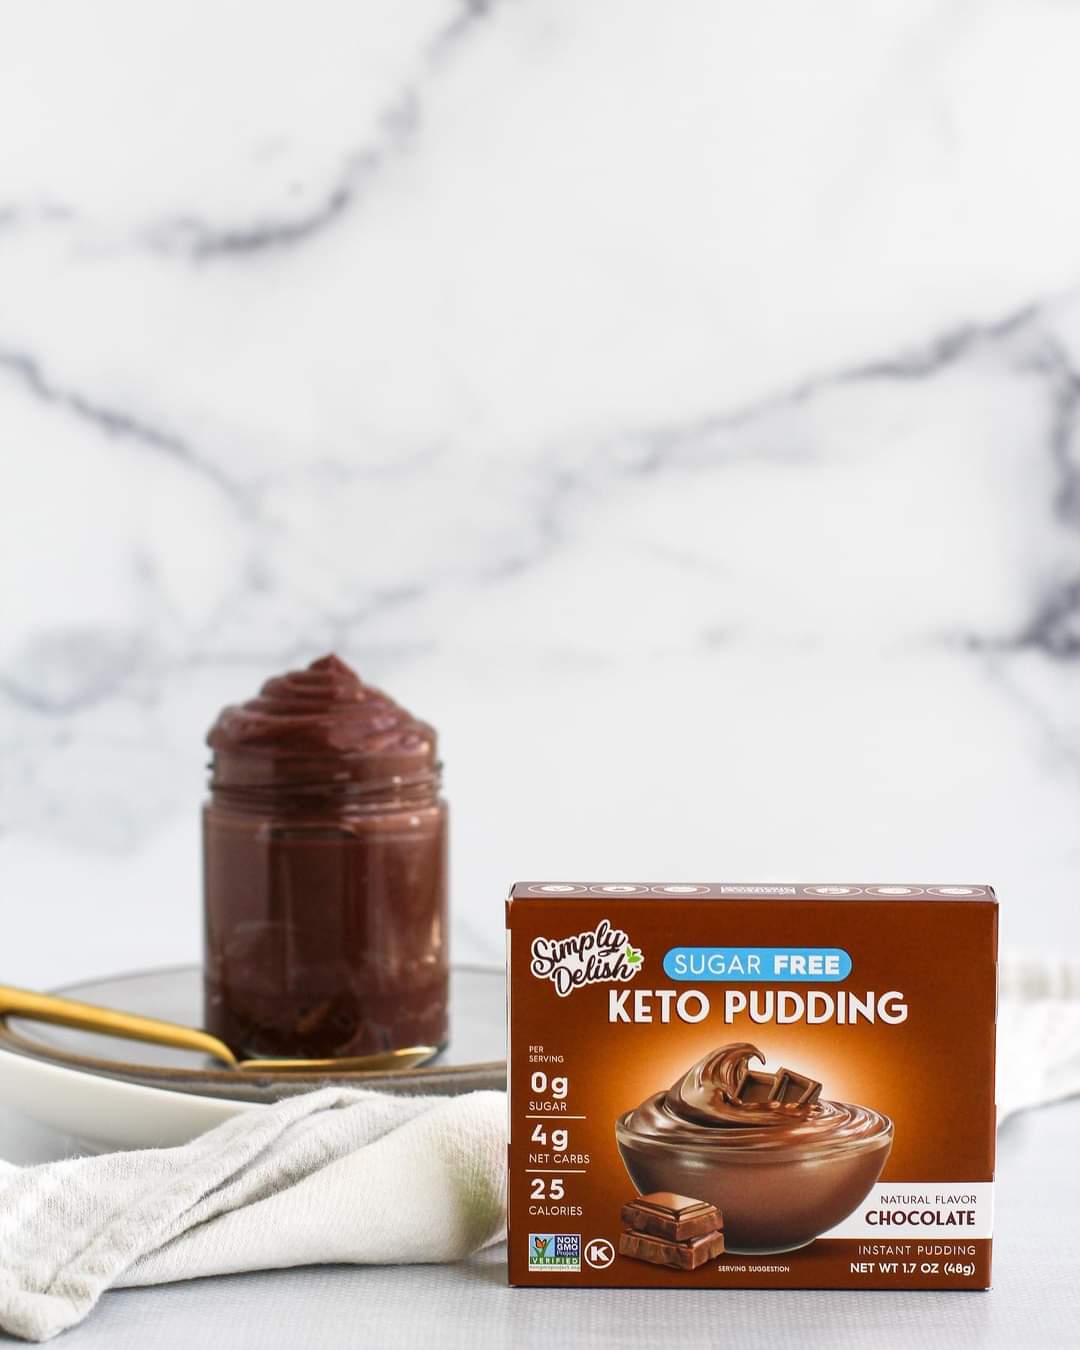 Vegan pudding from Simply Delish